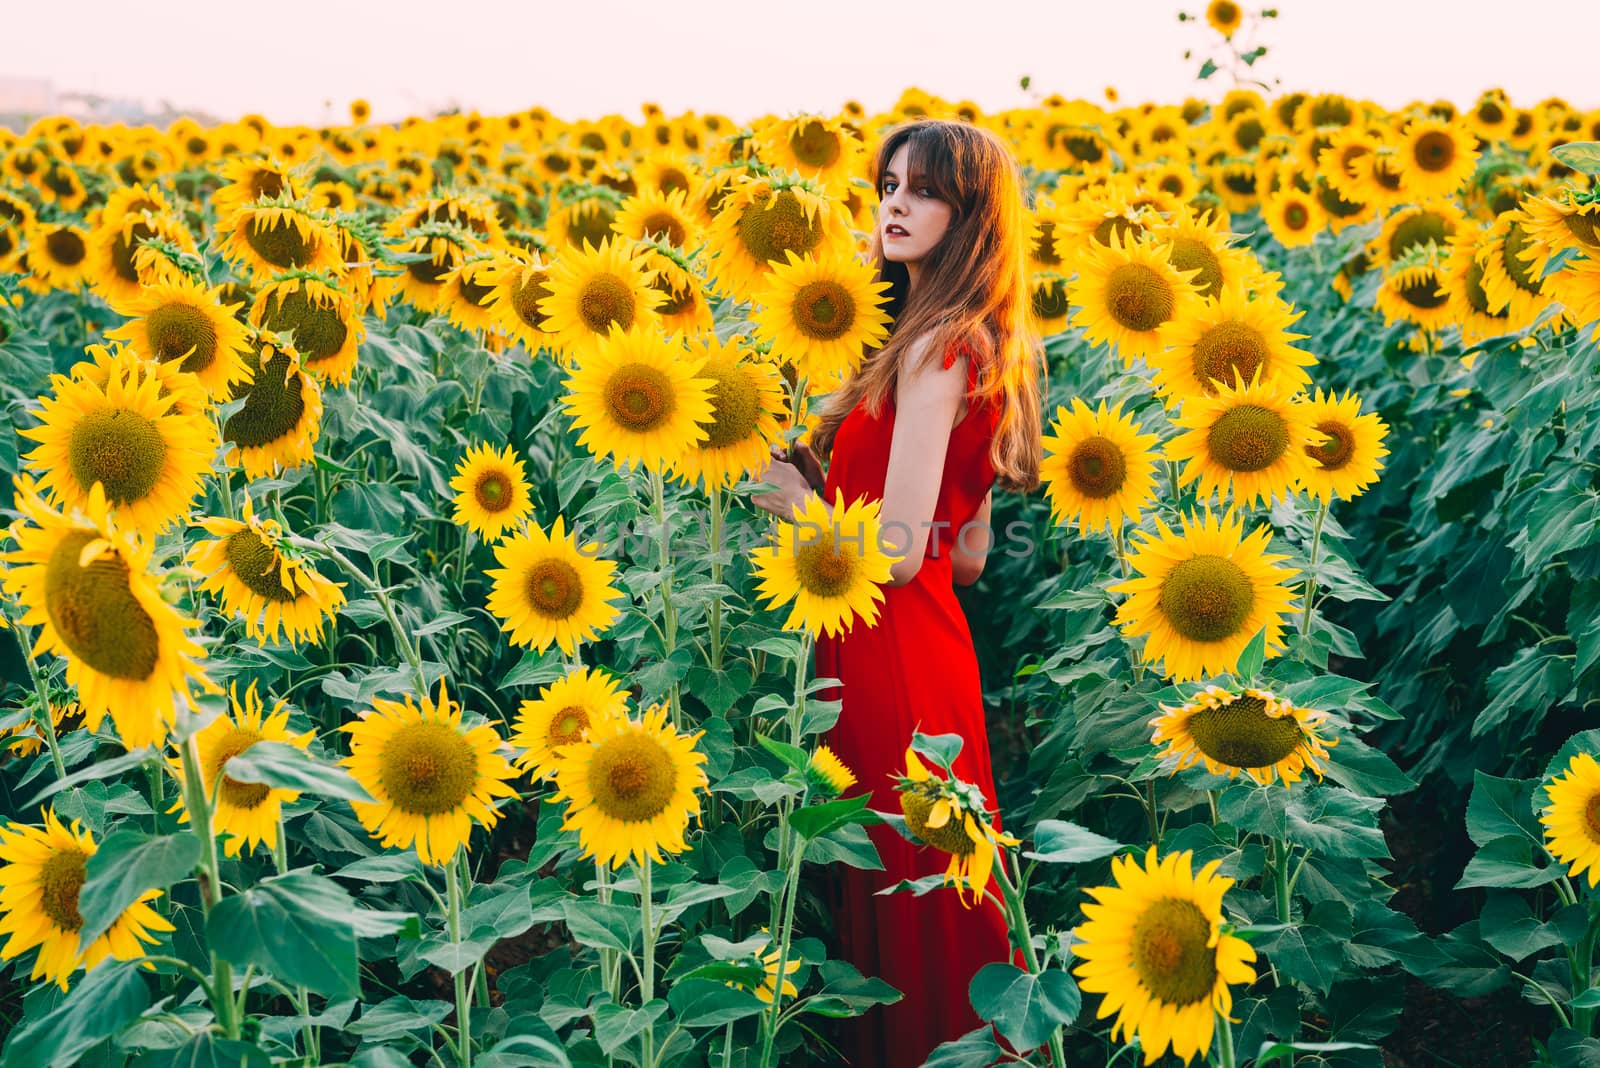 woman with red dress in sunflowers field.